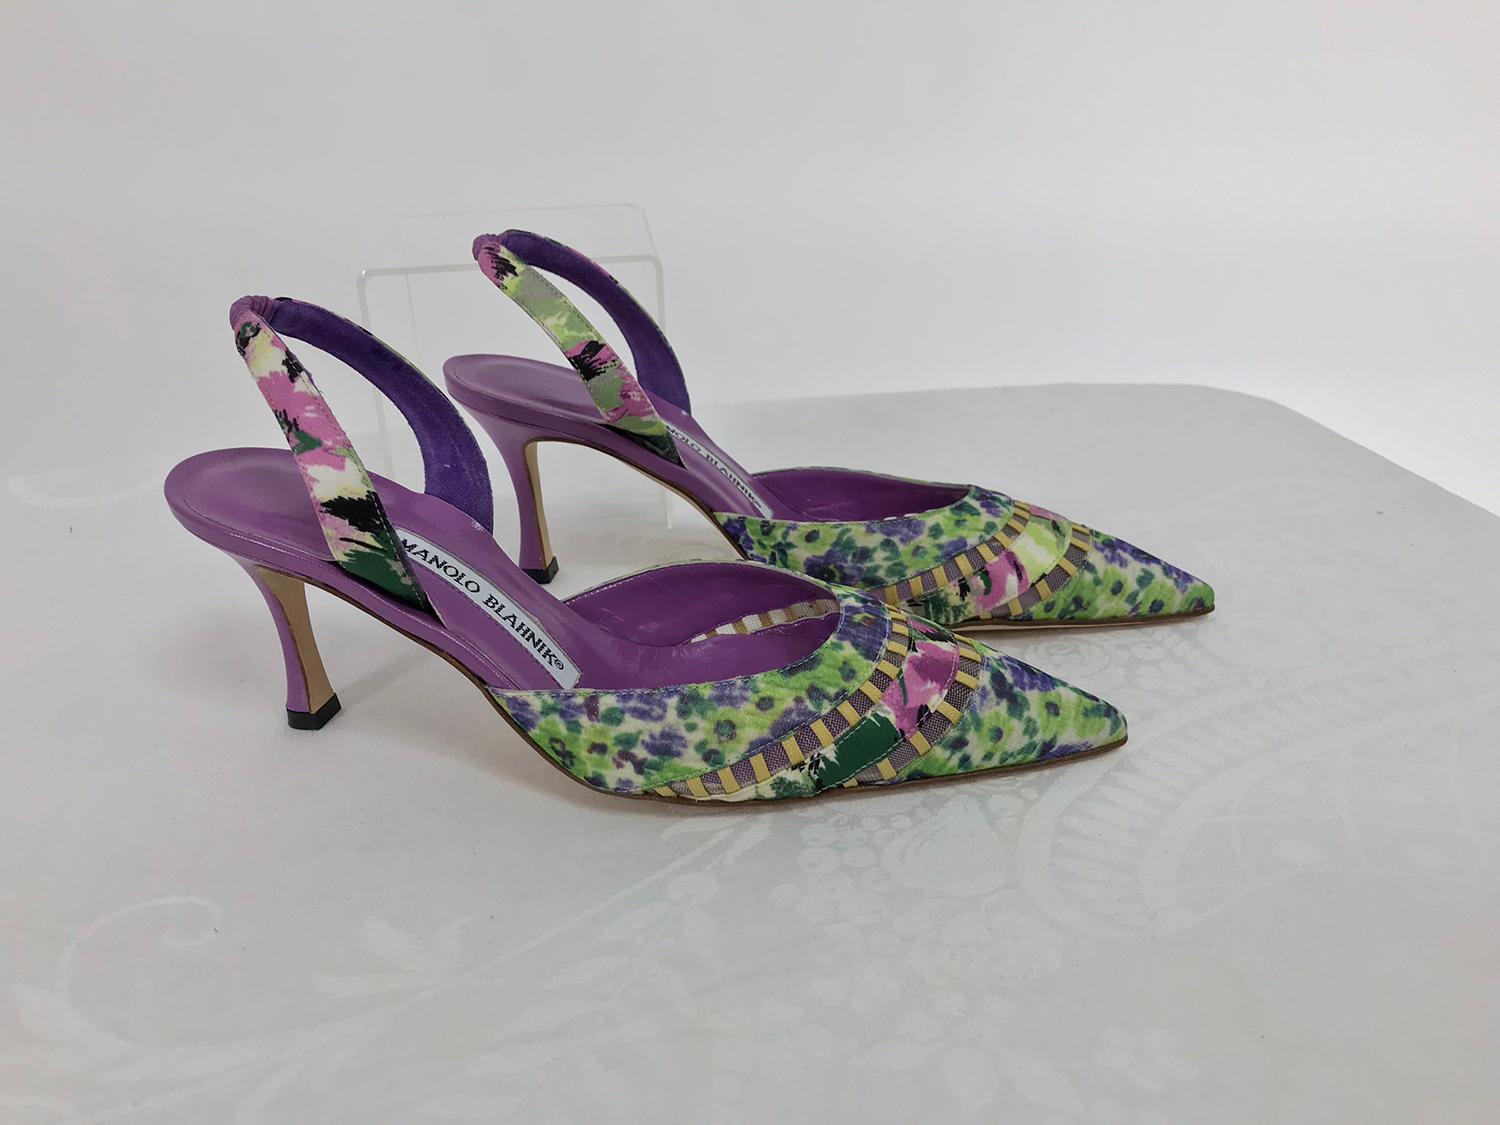 Manolo Blahnik Stigmatic floral silk purple leather sling back heels 36 1/2. Gorgeous water colour  floral shoe with bands of cream leather and mesh insets at the front, the lining, heels and strap are in lilac leather. New with box and protector